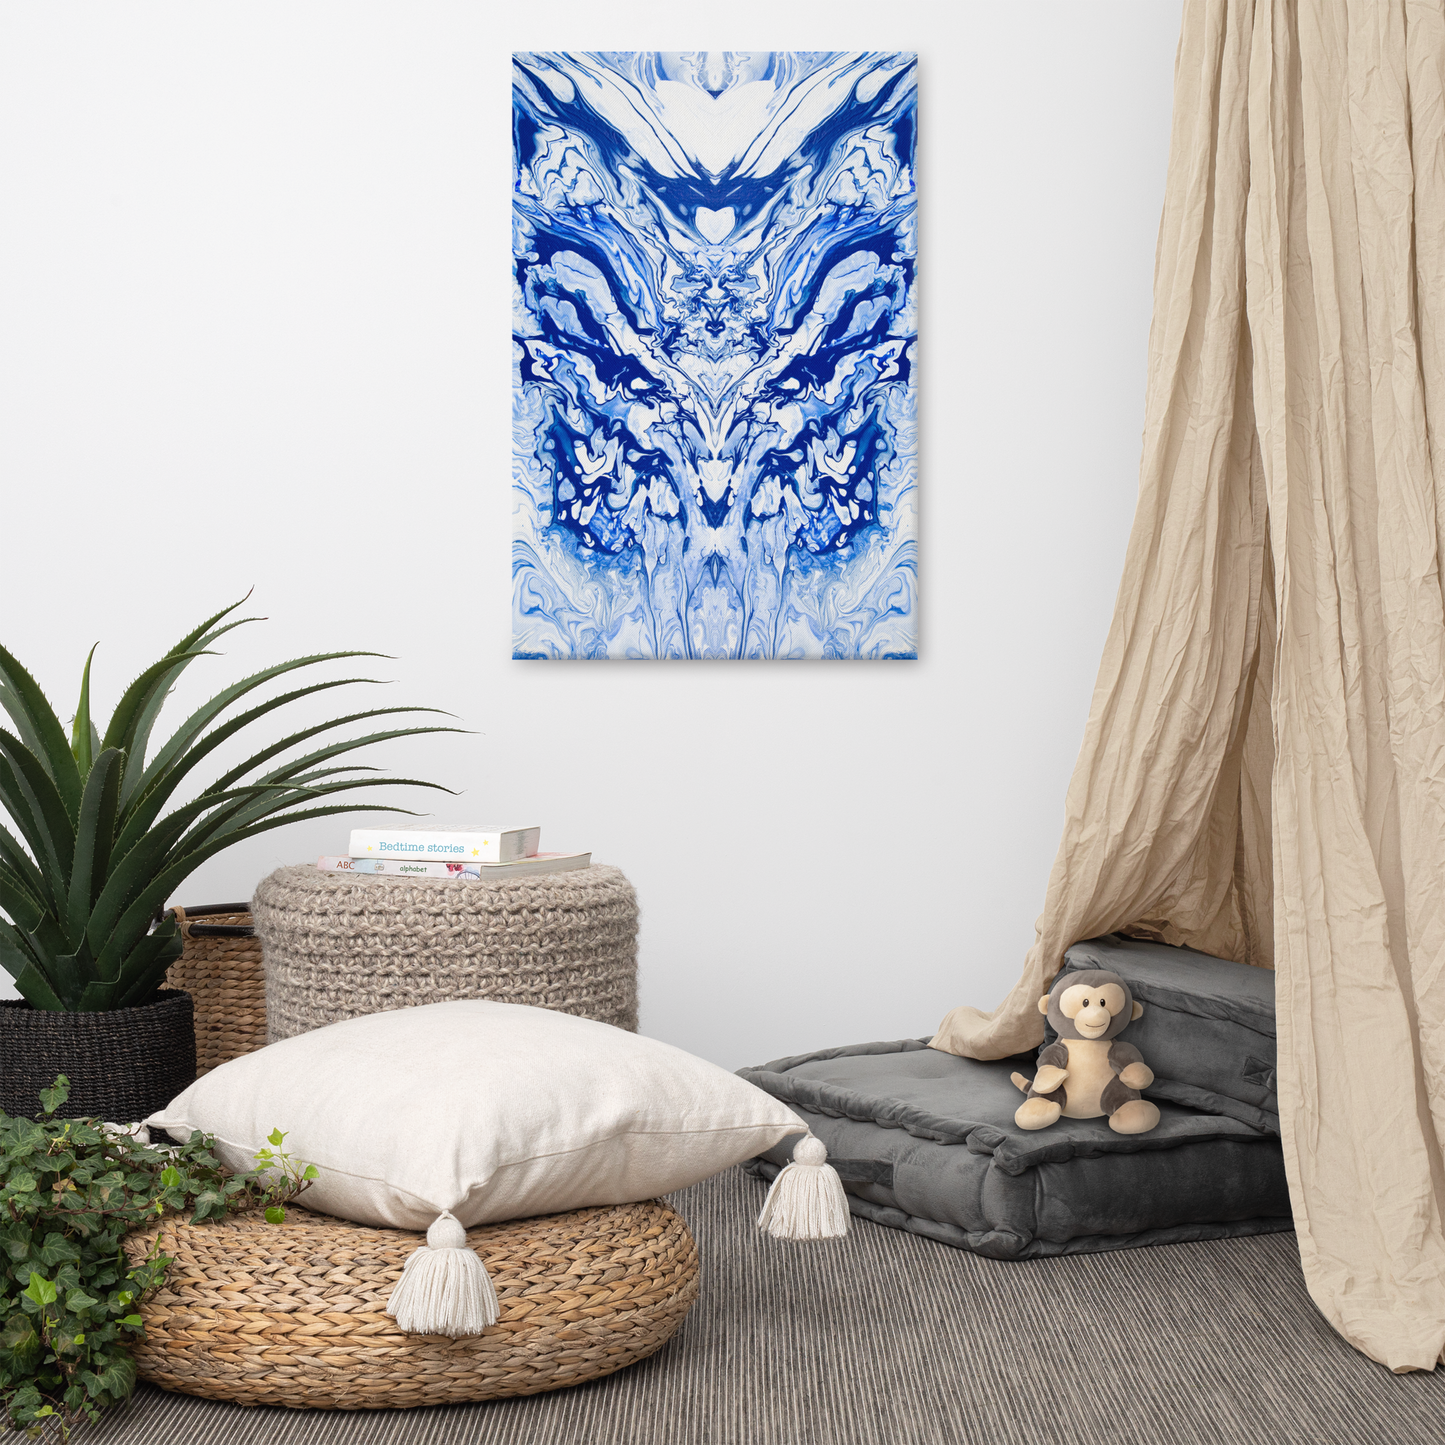 NightOwl Studio Abstract Wall Art, Lord Blue, Boho Living Room, Bedroom, Office, and Home Decor, Premium Canvas with Wooden Frame, Acrylic Painting Reproduction, 24” x 36”